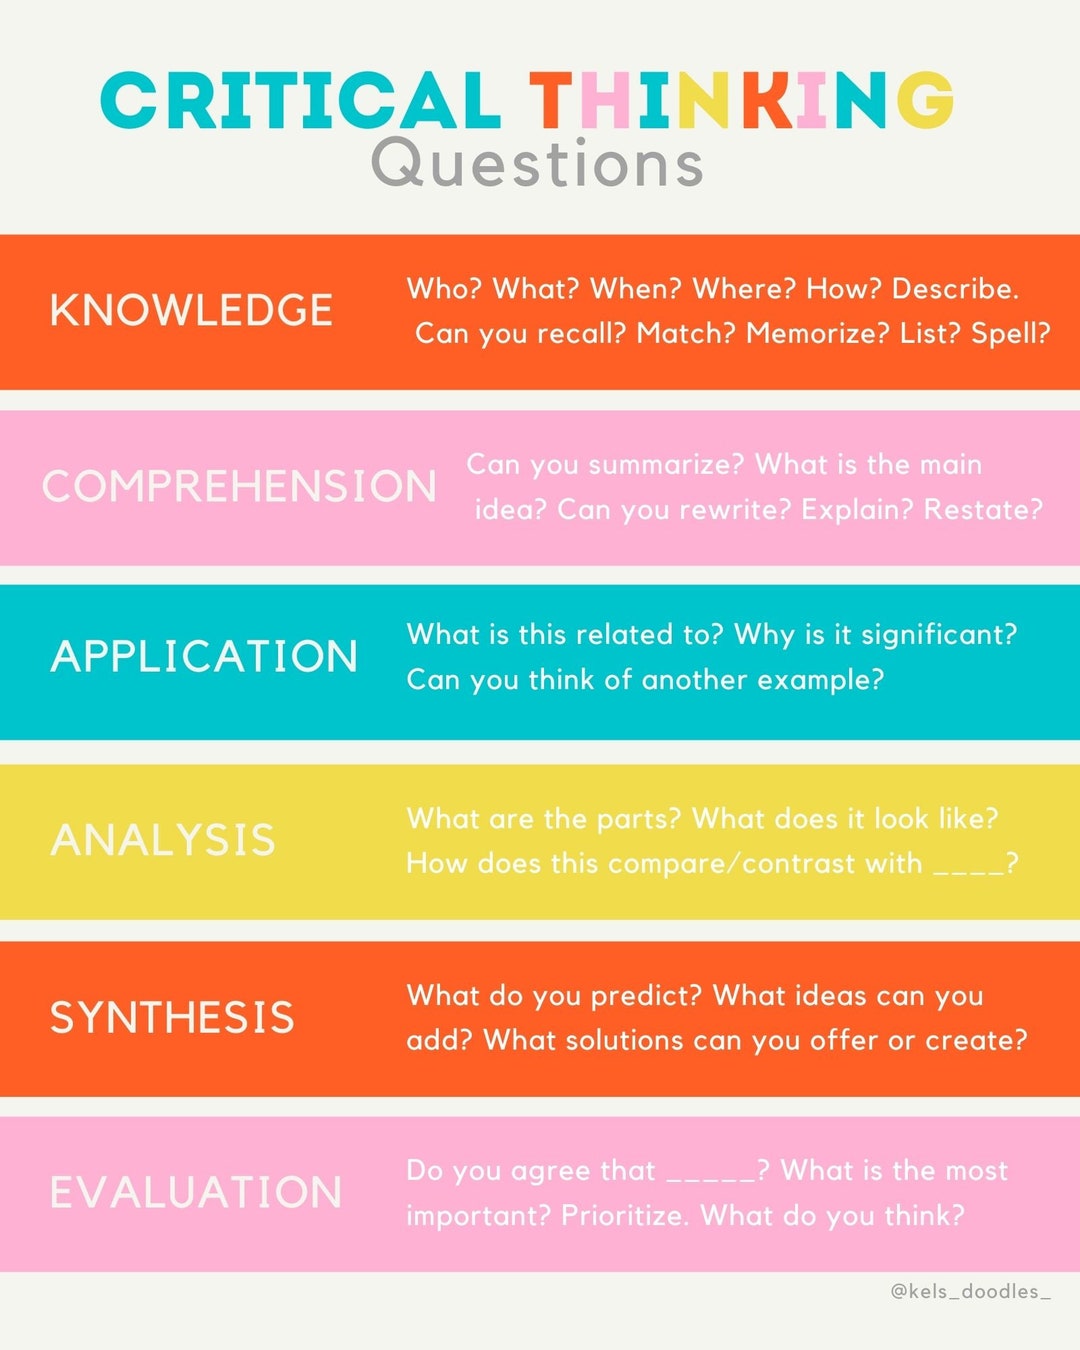 critical thinking questions to understand